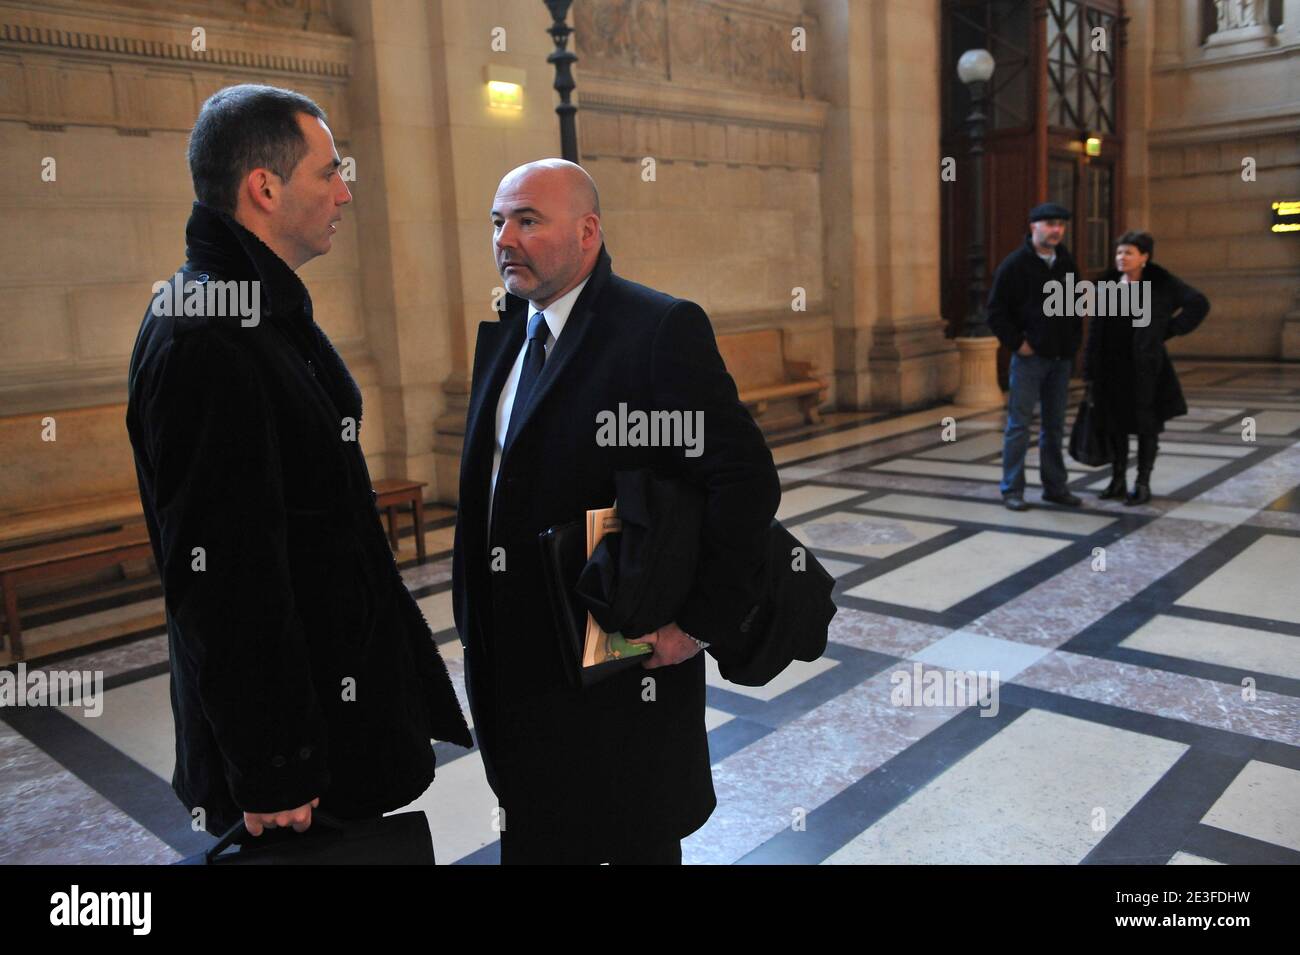 Yvan Colonna's laywers Gilles Simeoni speaks Pascal Garbarini behind Christine Colonna, Yvan Colonna's sister and Stephane Colonna, Yvan Colonna's brother at the Paris courthouse to attend the Yvan Colonna Trial, in Paris, France, on March 6, 2009. Photo by Mousse/ABACAPRESS.COM Stock Photo